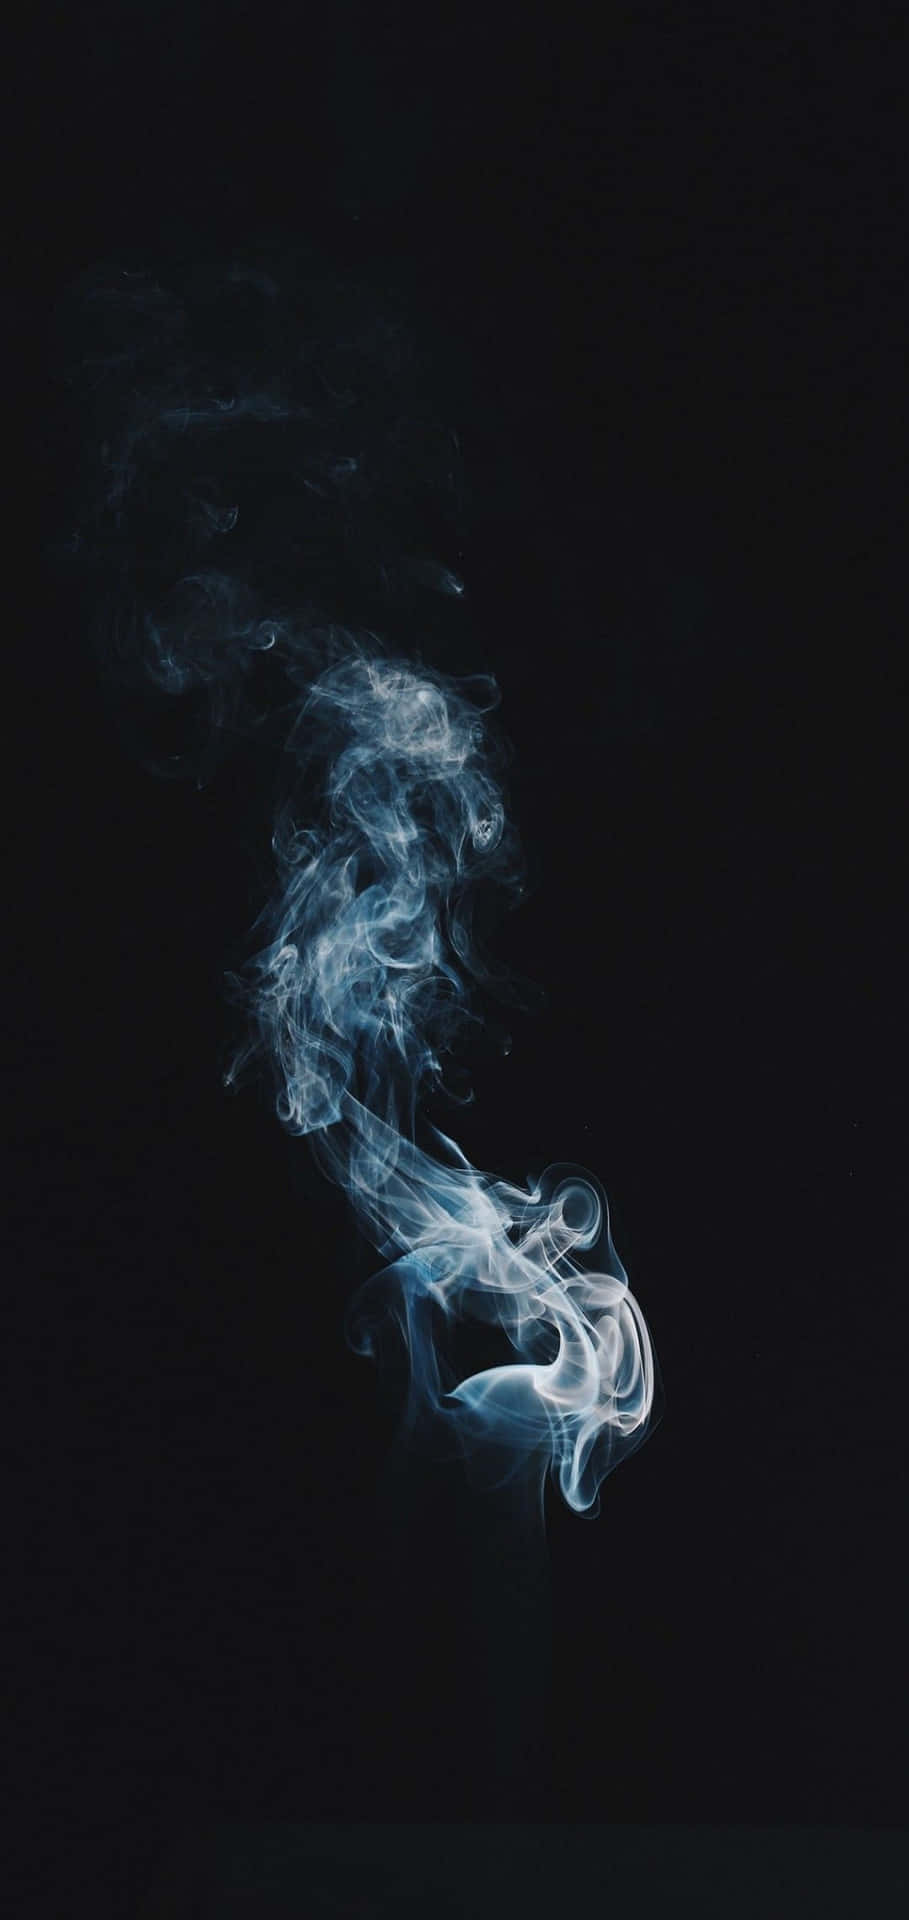 A Black Background With Smoke In The Background